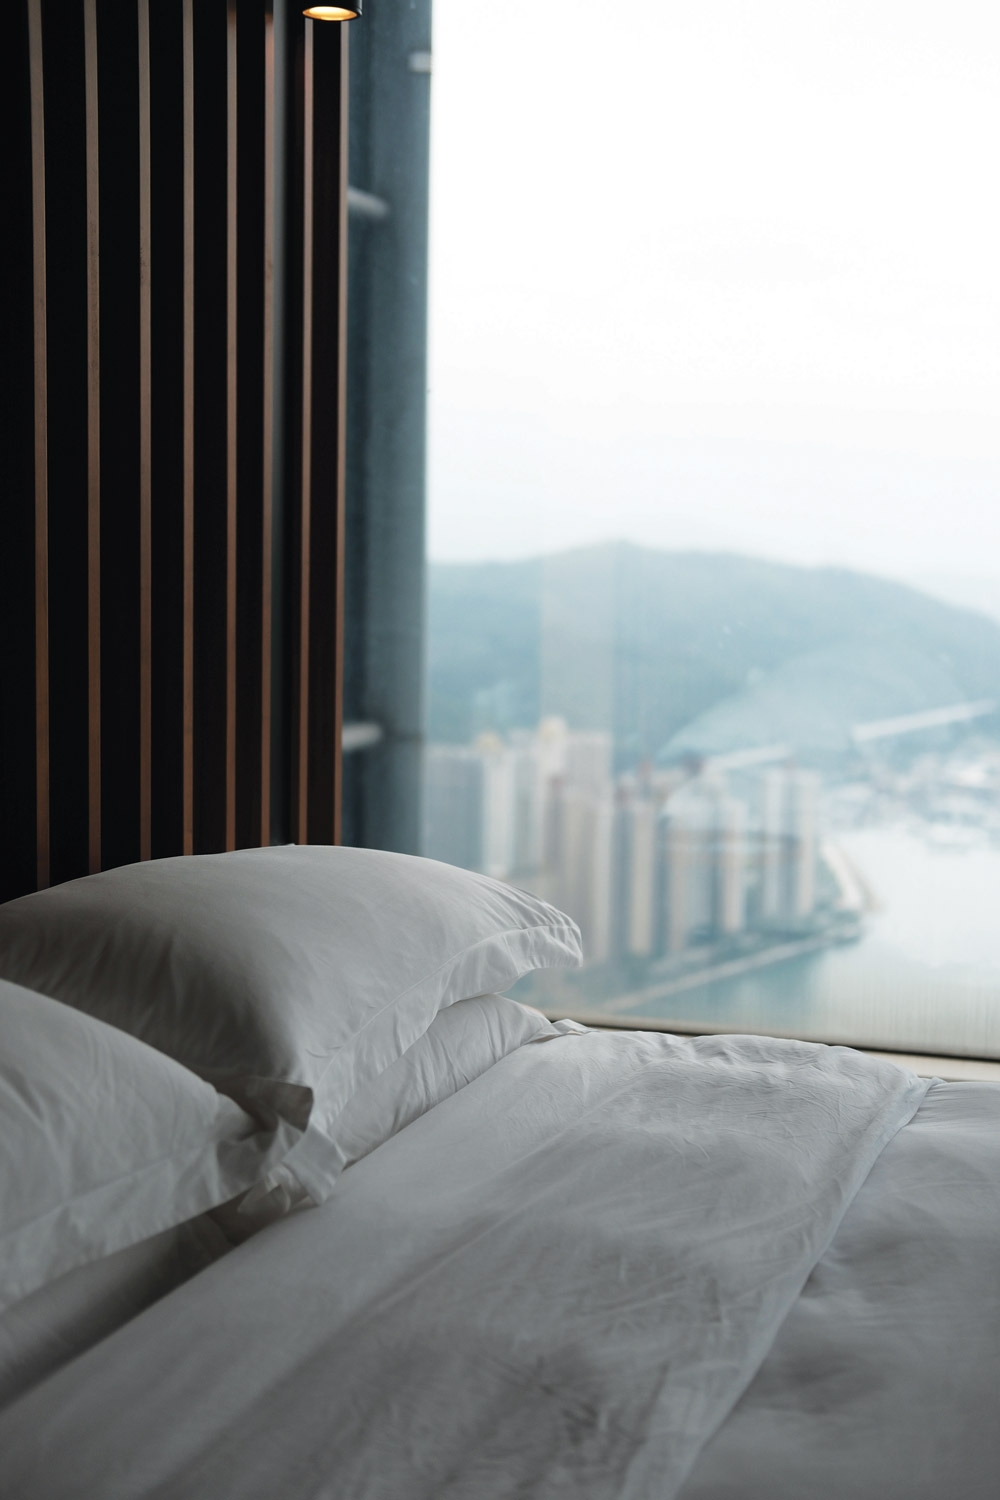 The view from the room is picturesque and feels like a dream, all within the “Nina” hotel.